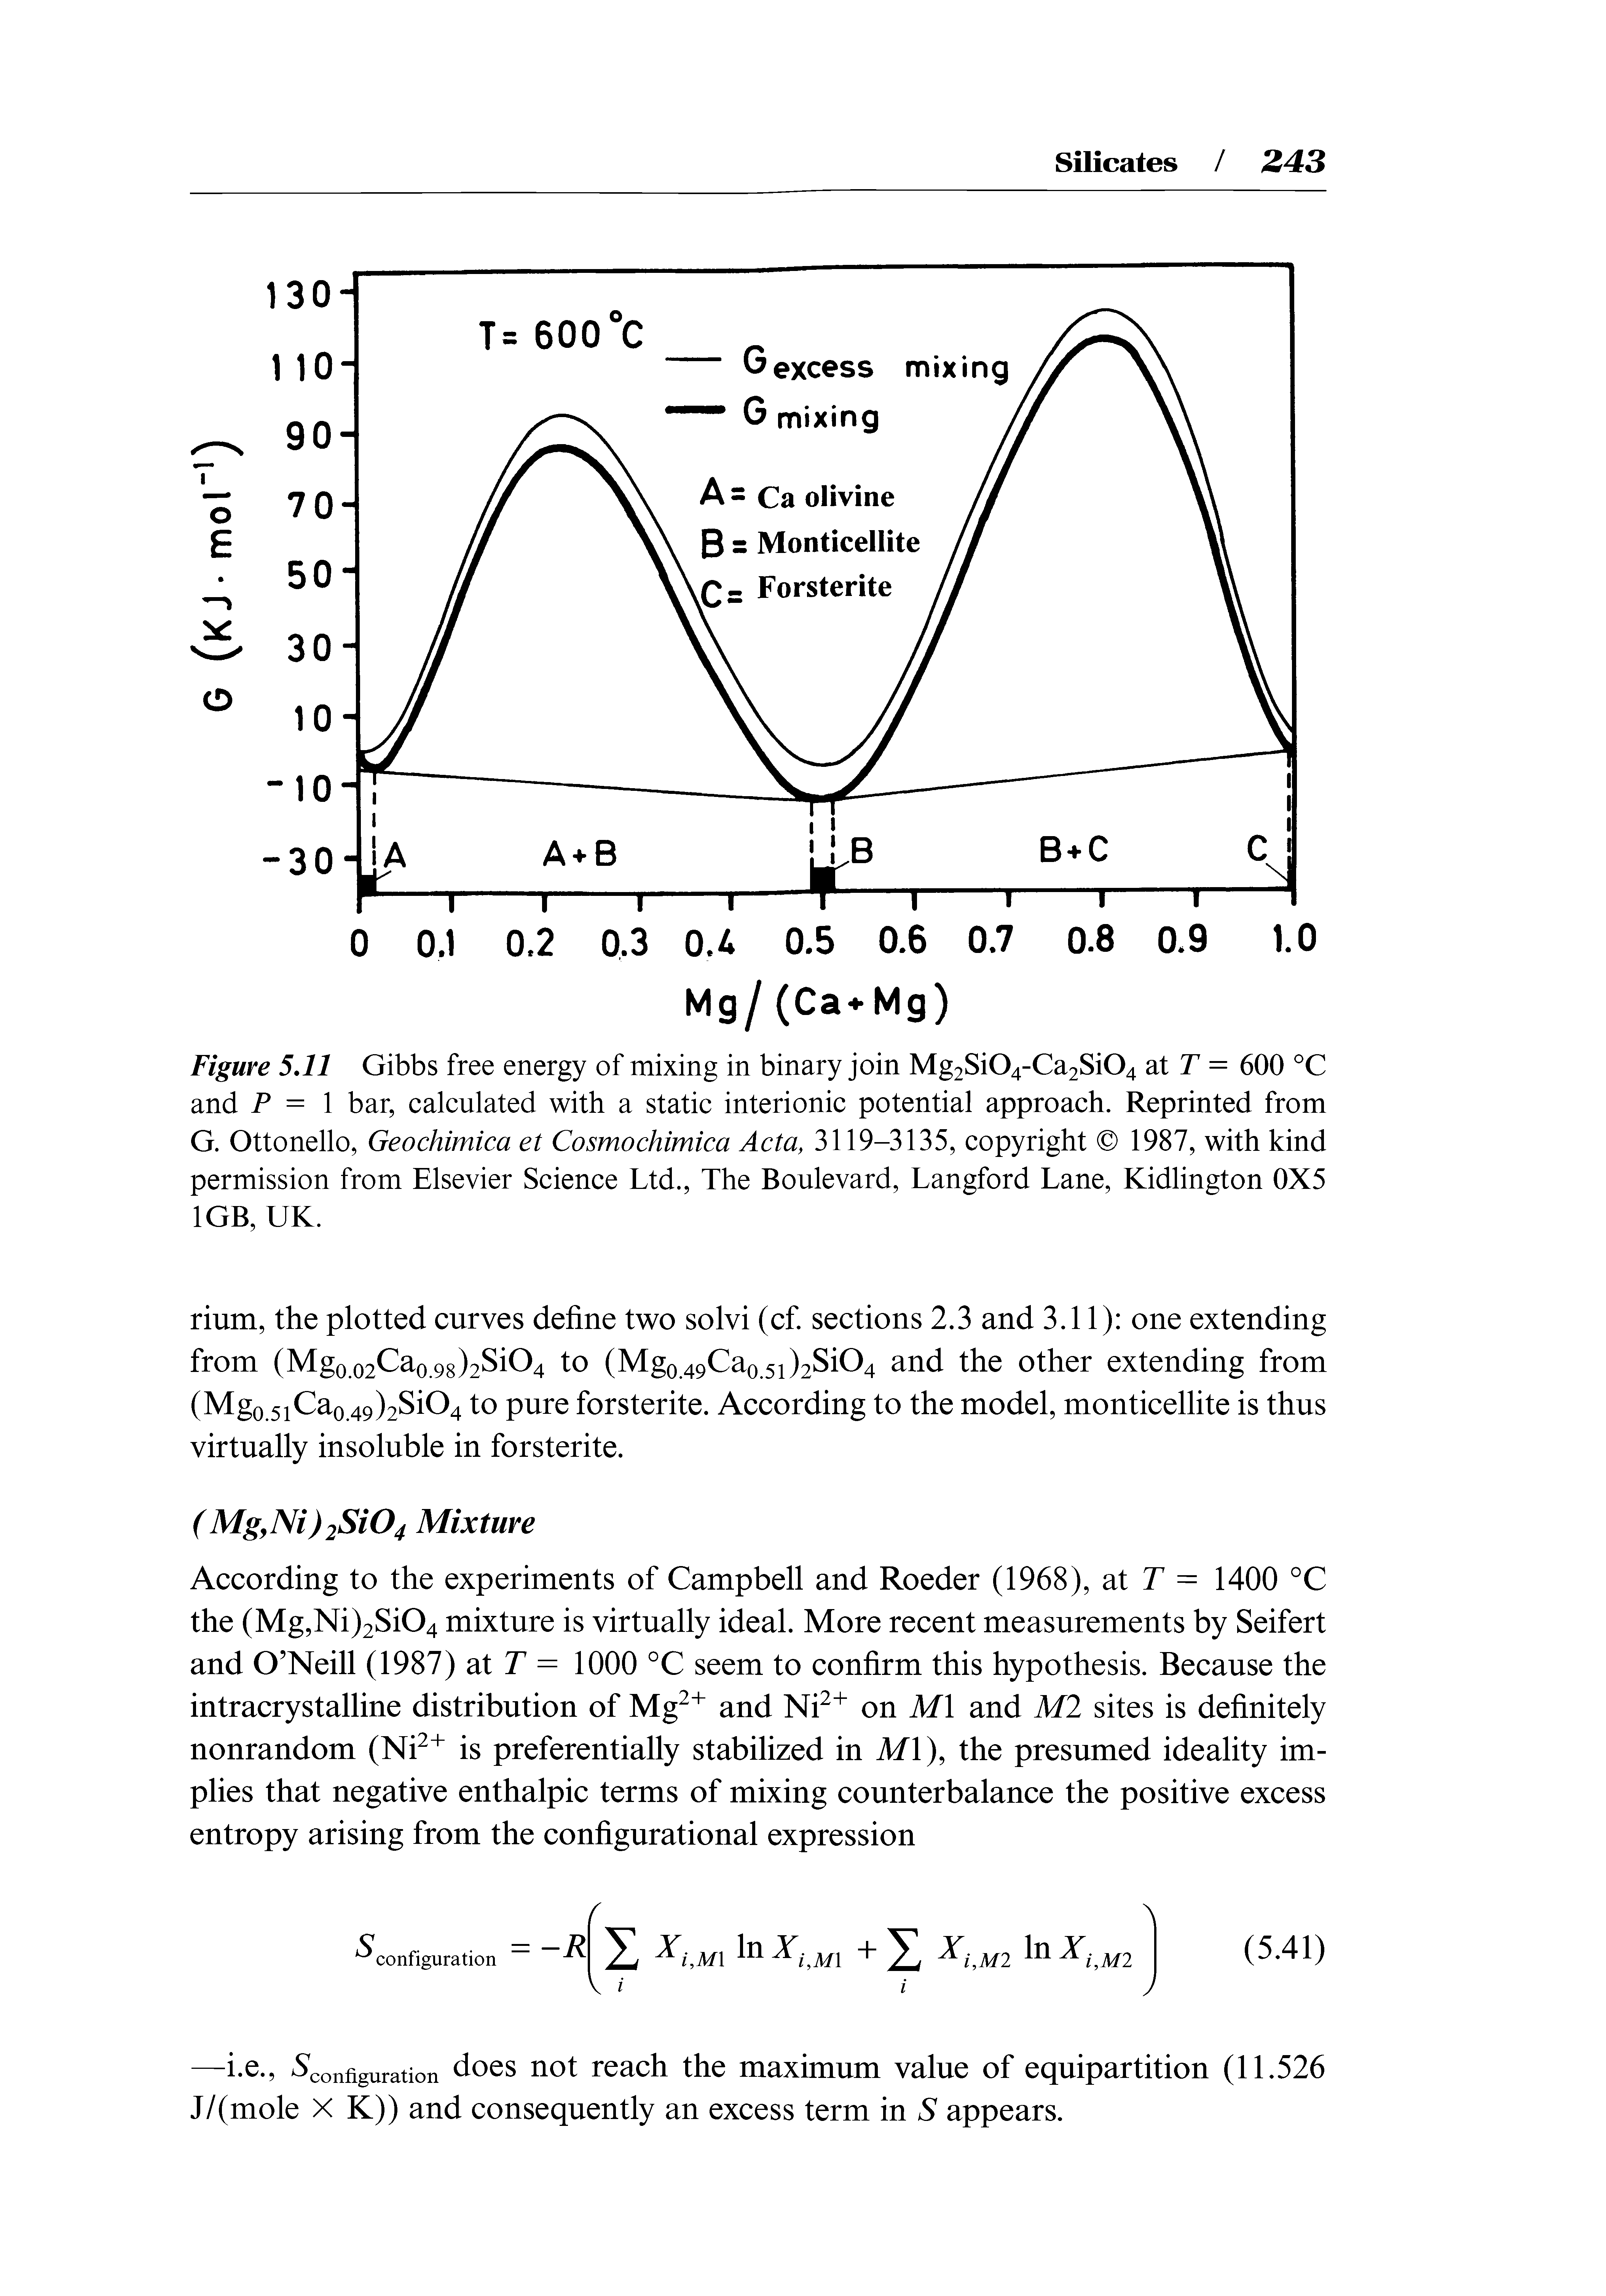 Figure 5.11 Gibbs free energy of mixing in binary join Mg2Si04-Ca2Si04 dXT = 600 °C and P = bar, calculated with a static interionic potential approach. Reprinted from G. Ottonello, Geochimica et Cosmochimica Acta, 3119-3135, copyright 1987, with kind permission from Elsevier Science Ltd., The Boulevard, Langford Lane, Kidlington 0X5 1GB, UK.